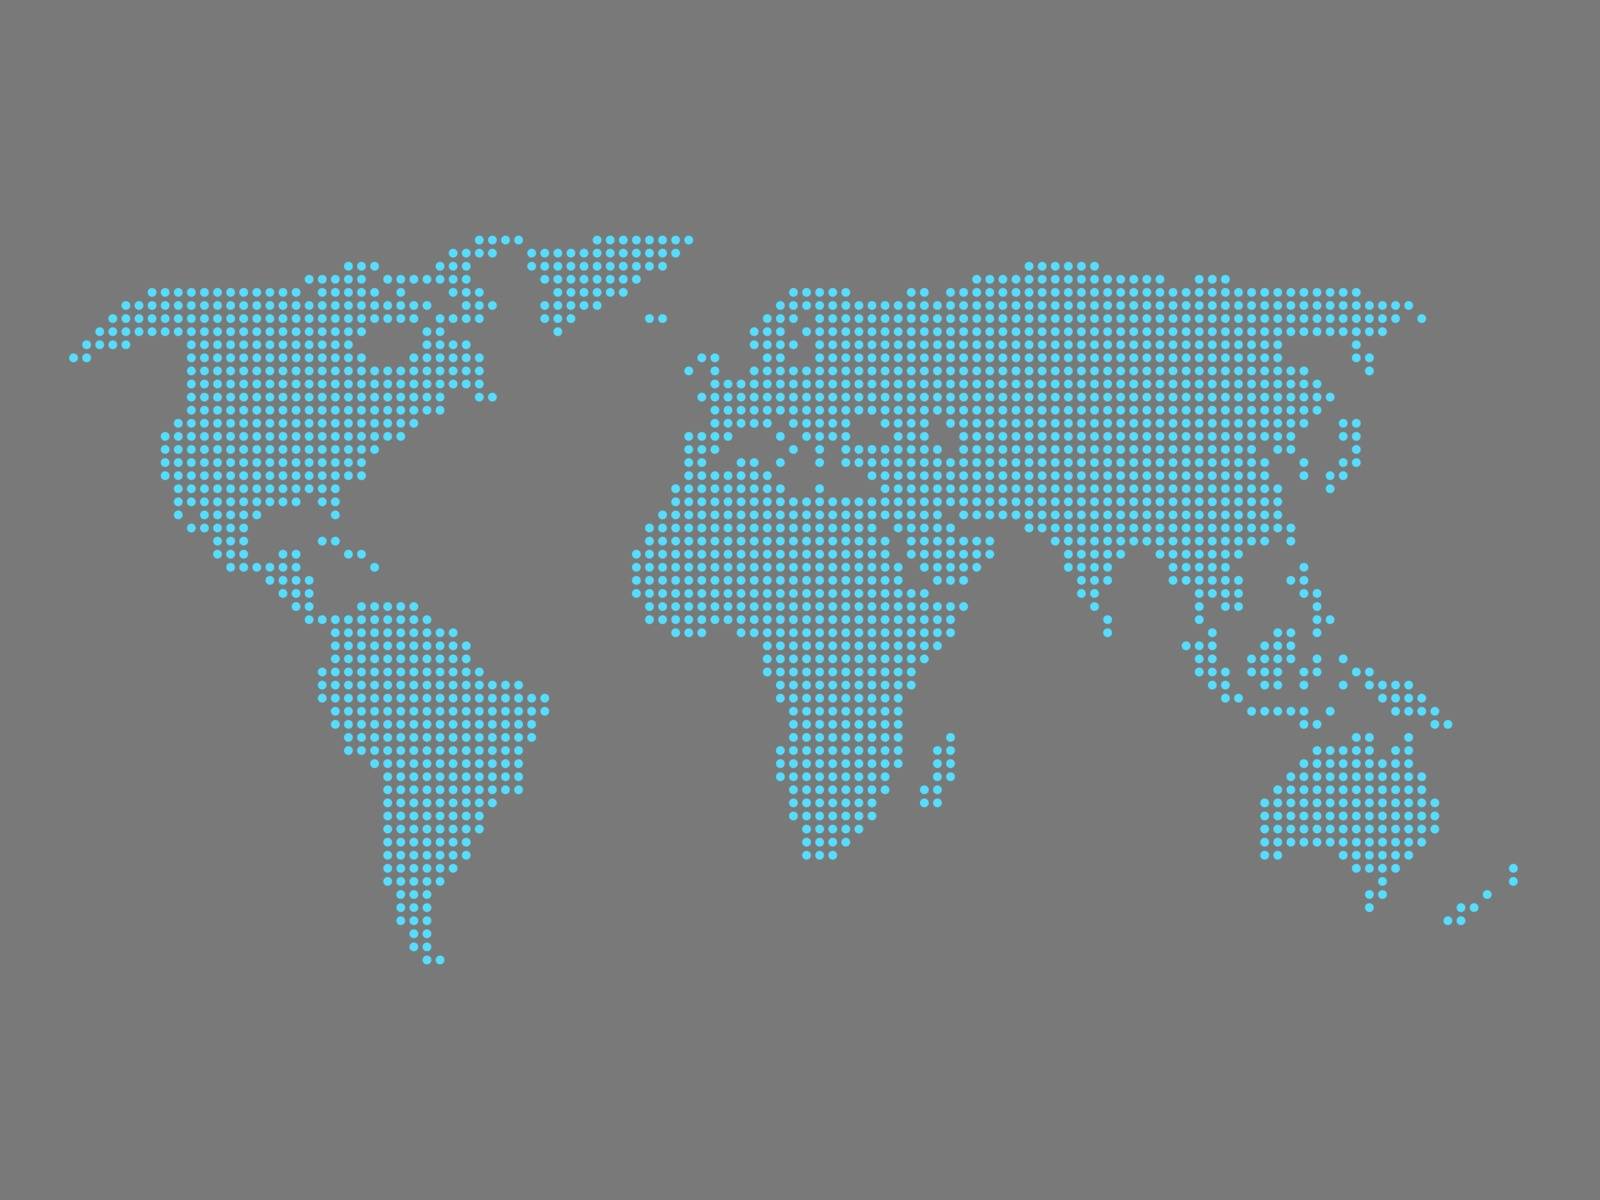 Dotted world map. Blue map on grey background. Vector illustration made of small circles.